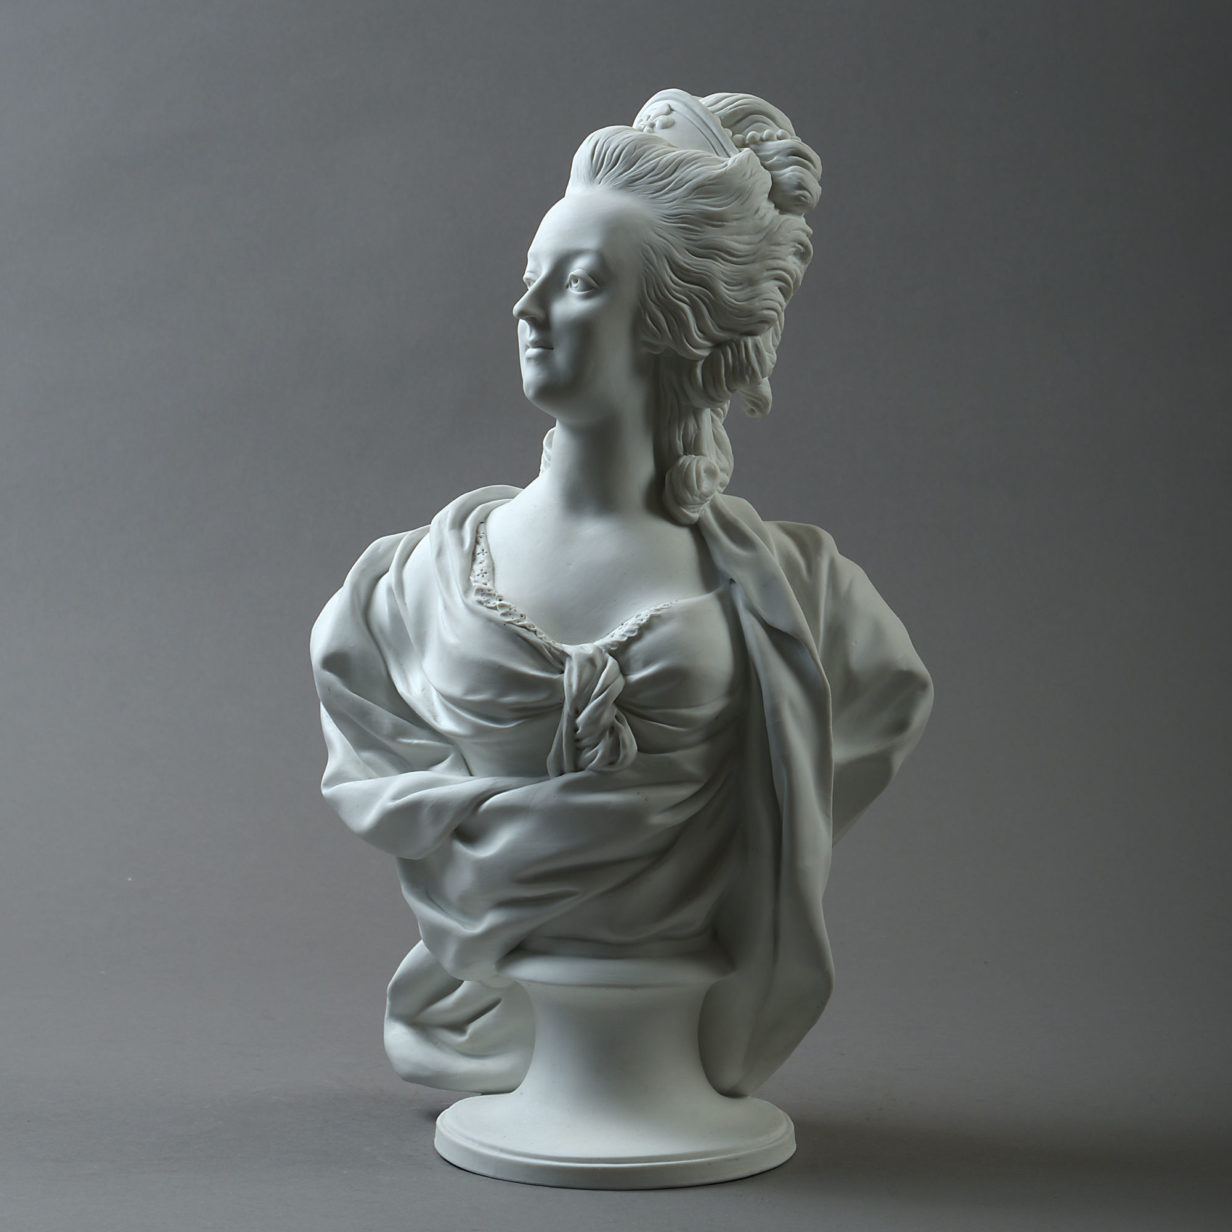 19th century biscuit porcelain bust of queen marie antoinette of france